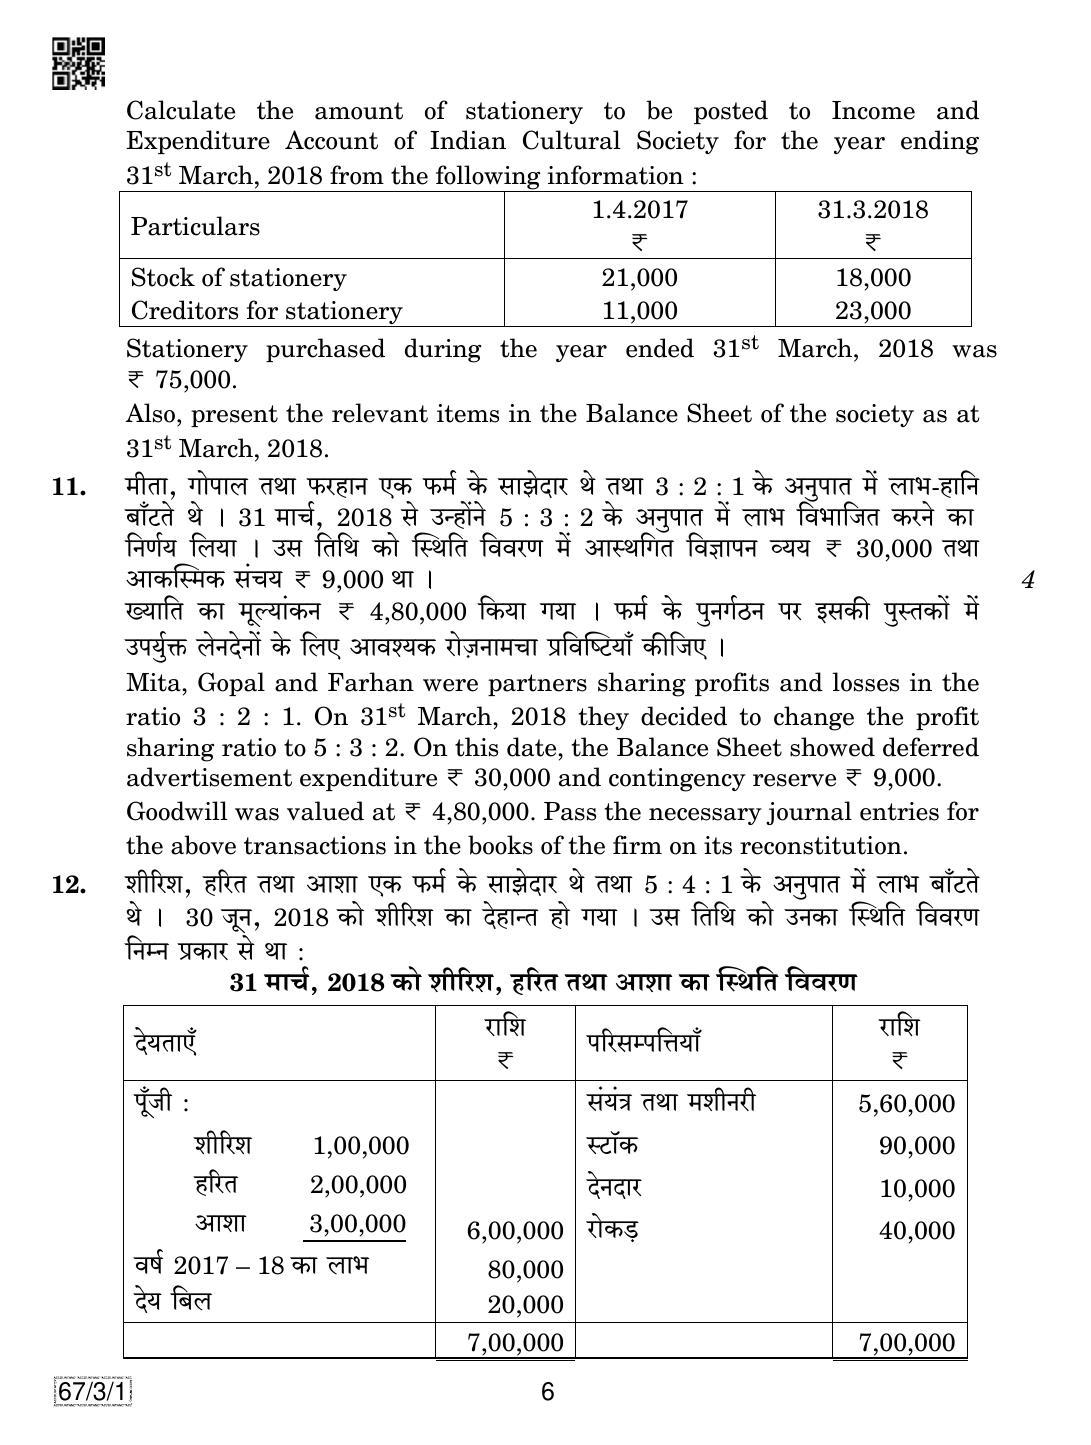 CBSE Class 12 67-3-1 Accountancy 2019 Question Paper - Page 6